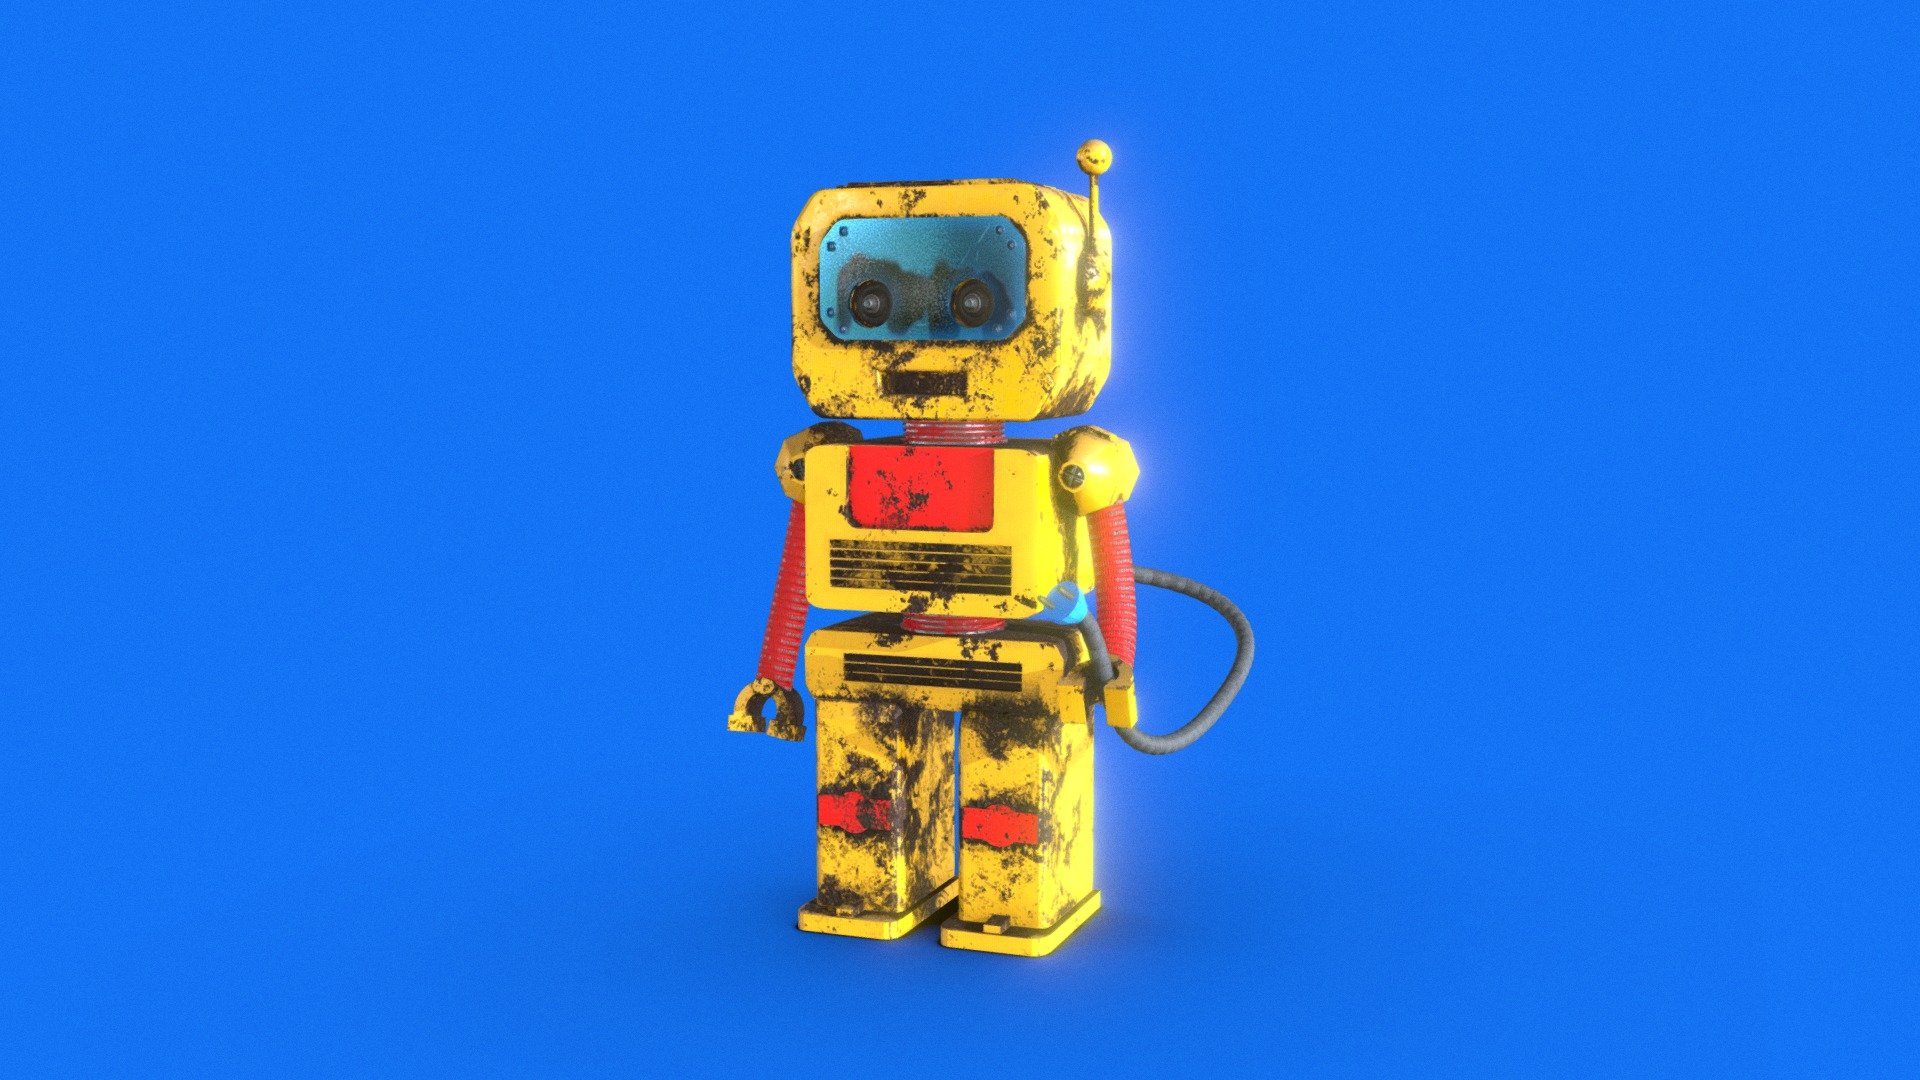 Hello to everyome, this is my entry for the #CuteRobotChallenge


This cute robot needs to find an electrical socket as soon as possible otherwise his battery will be flat  :(
Made in Blender and texturized in substance painter 3d model